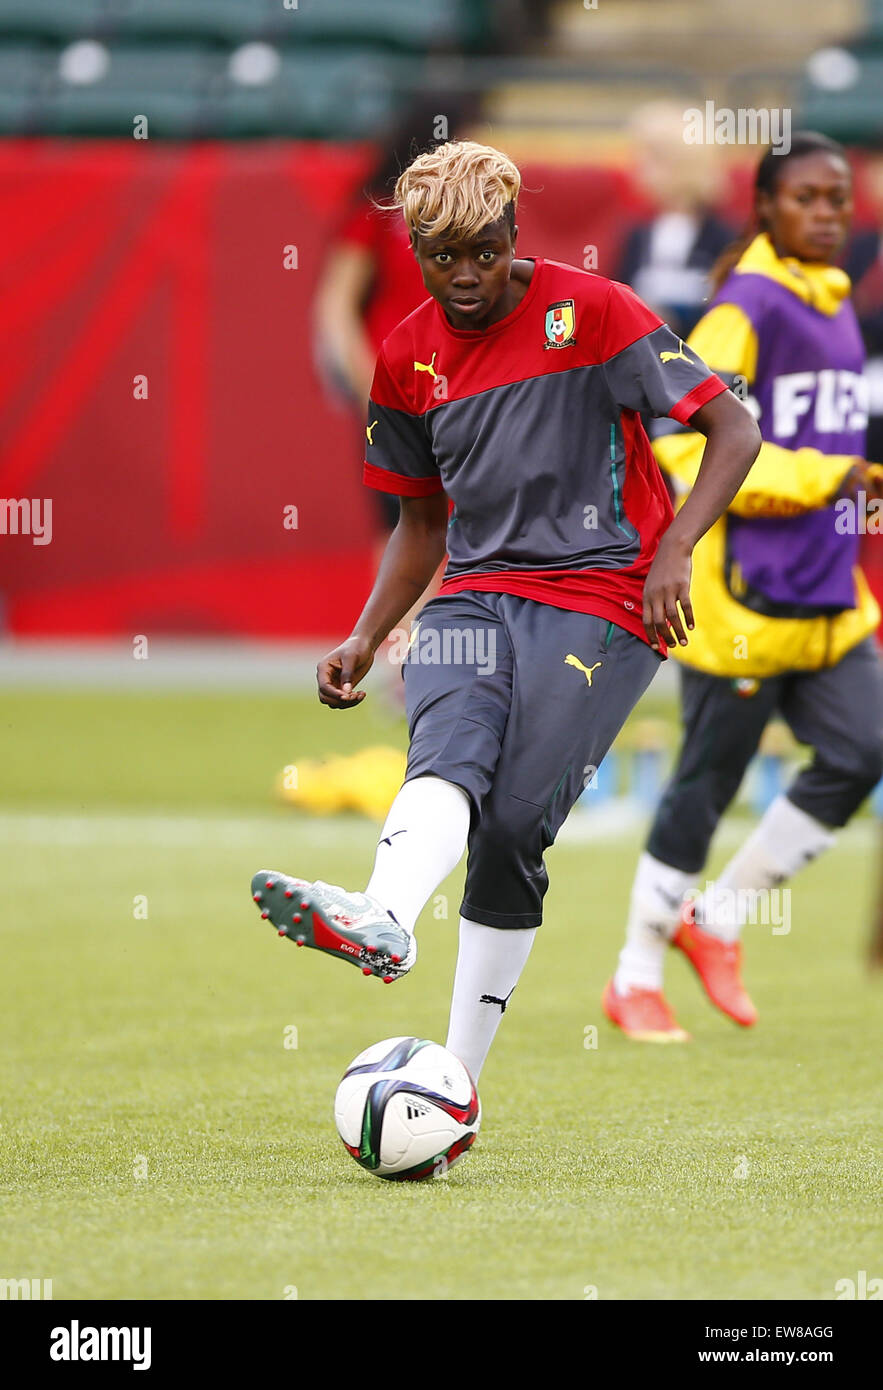 Edmonton, Canada. 19th June, 2015. Cameroon's Gaelle Enganamouit attends a  training session ahead of the Round of 16 match against China at  Commonwealth Stadium in Edmonton, Canada. Credit: Ding Xu/Xinhua/Alamy Live  News